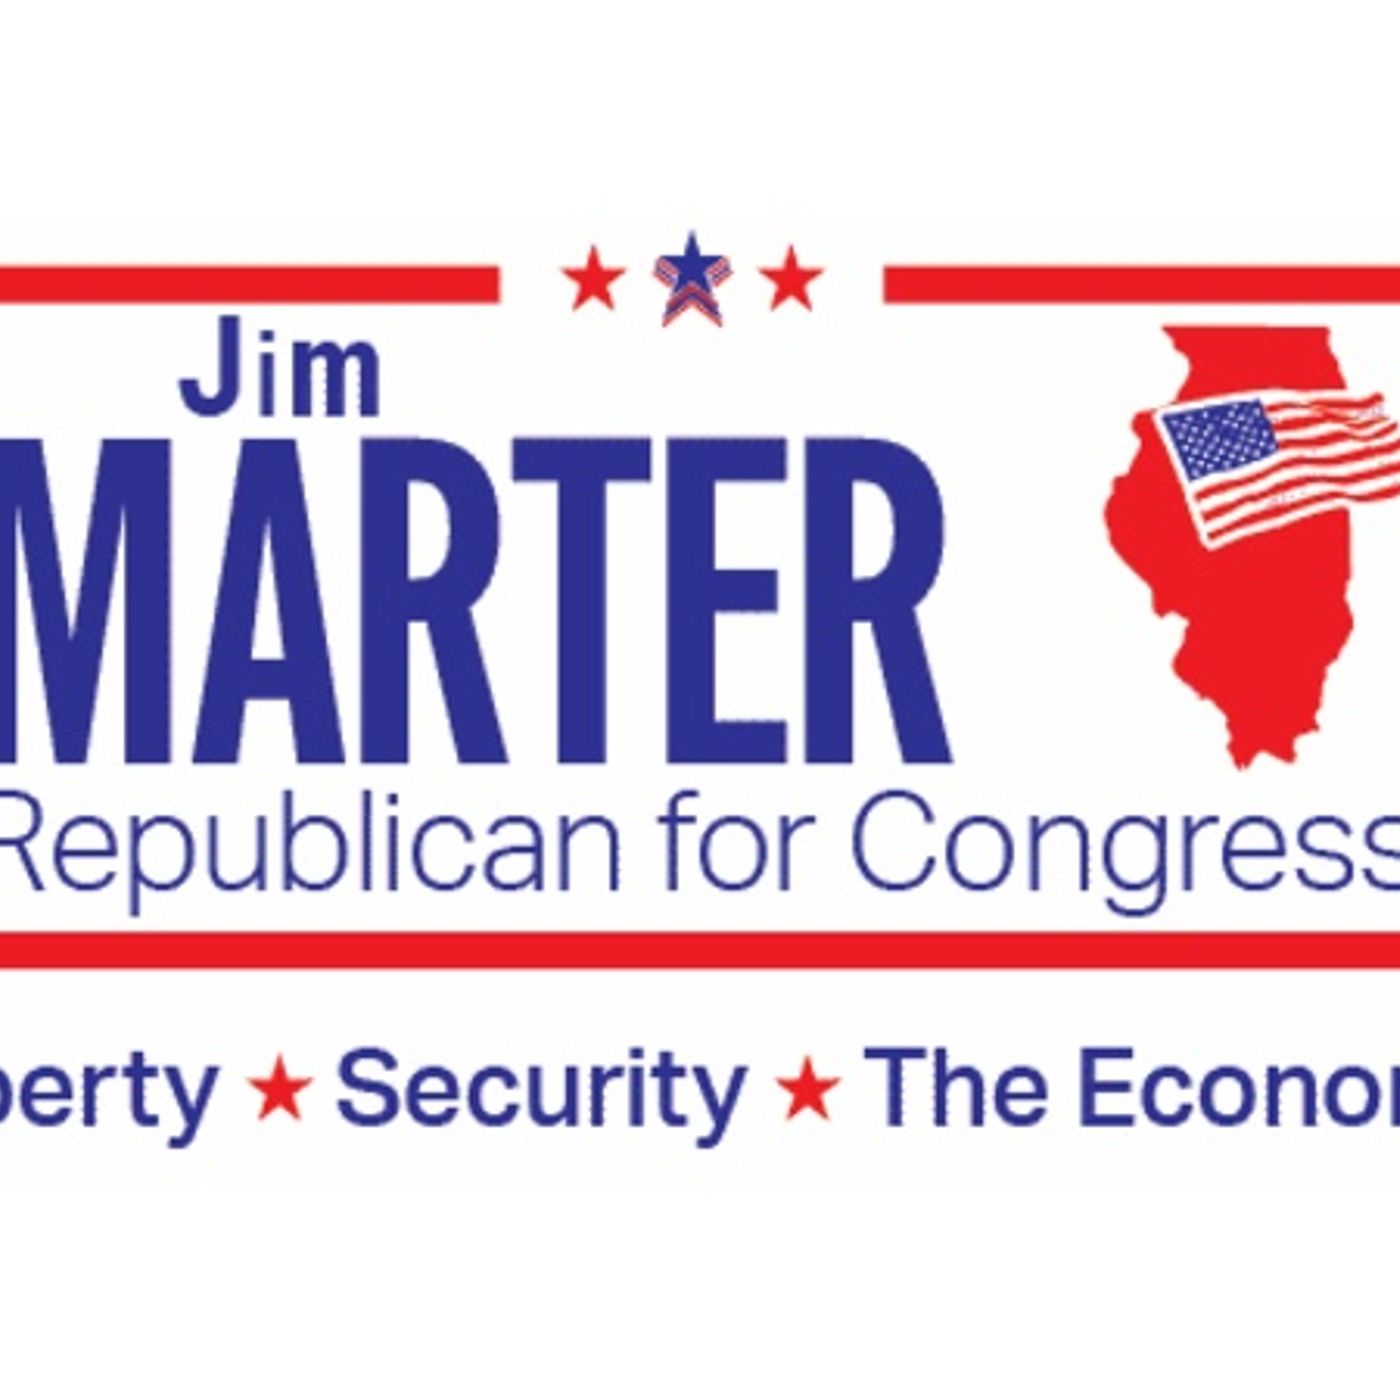 Meet Congressional Candidate James Marter for Illinois 14th District